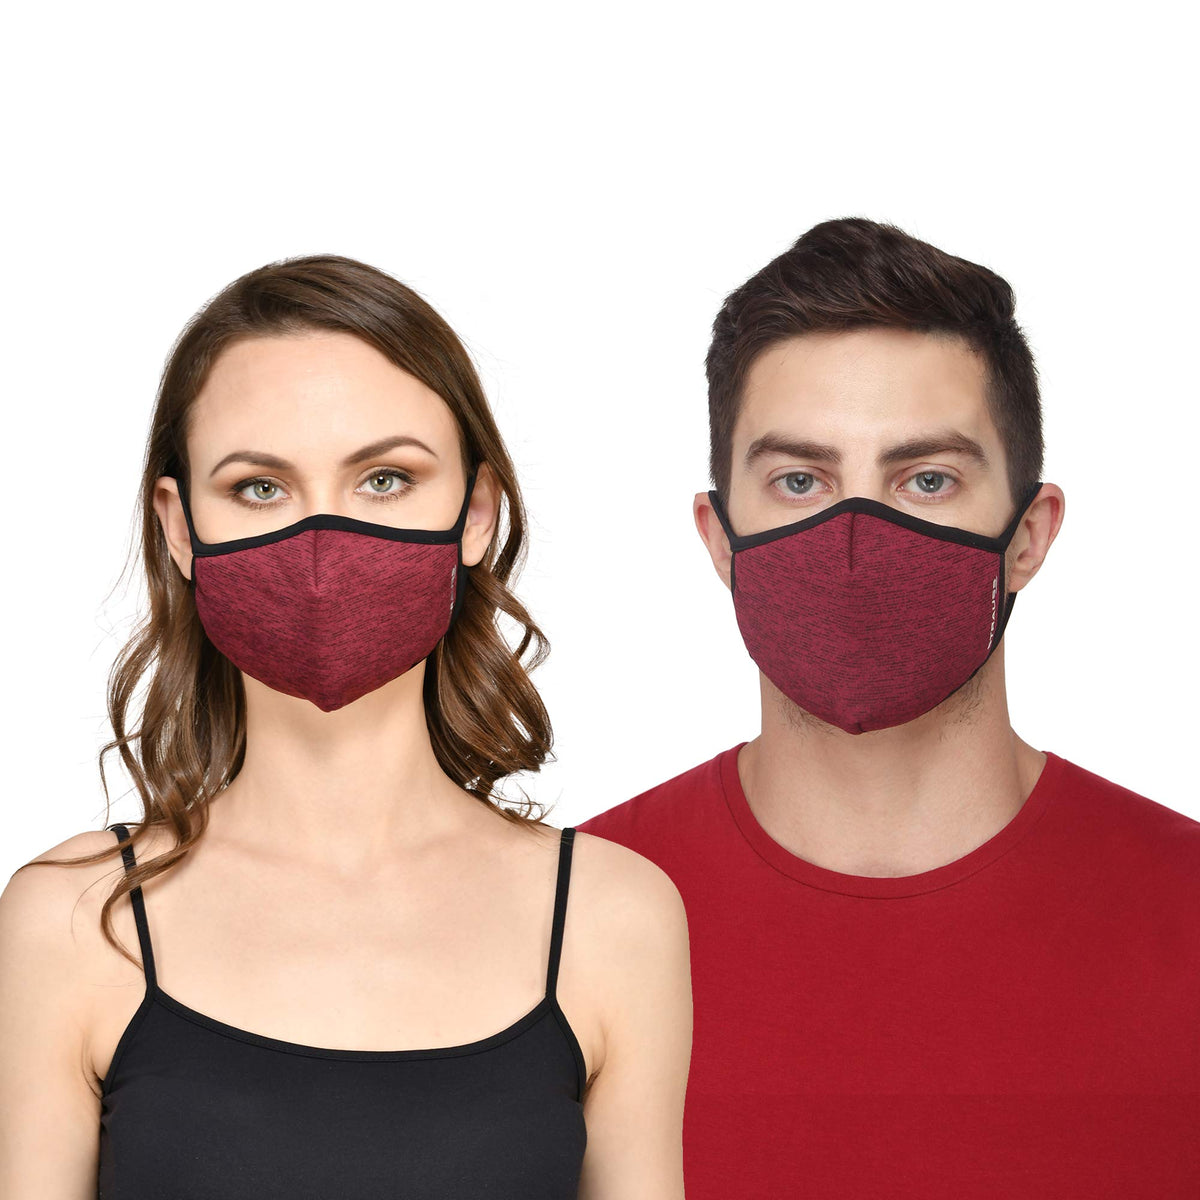 STRAUSS Unisex Anti-Bacterial Protection Mask, Non Vent, Medium, (Red)